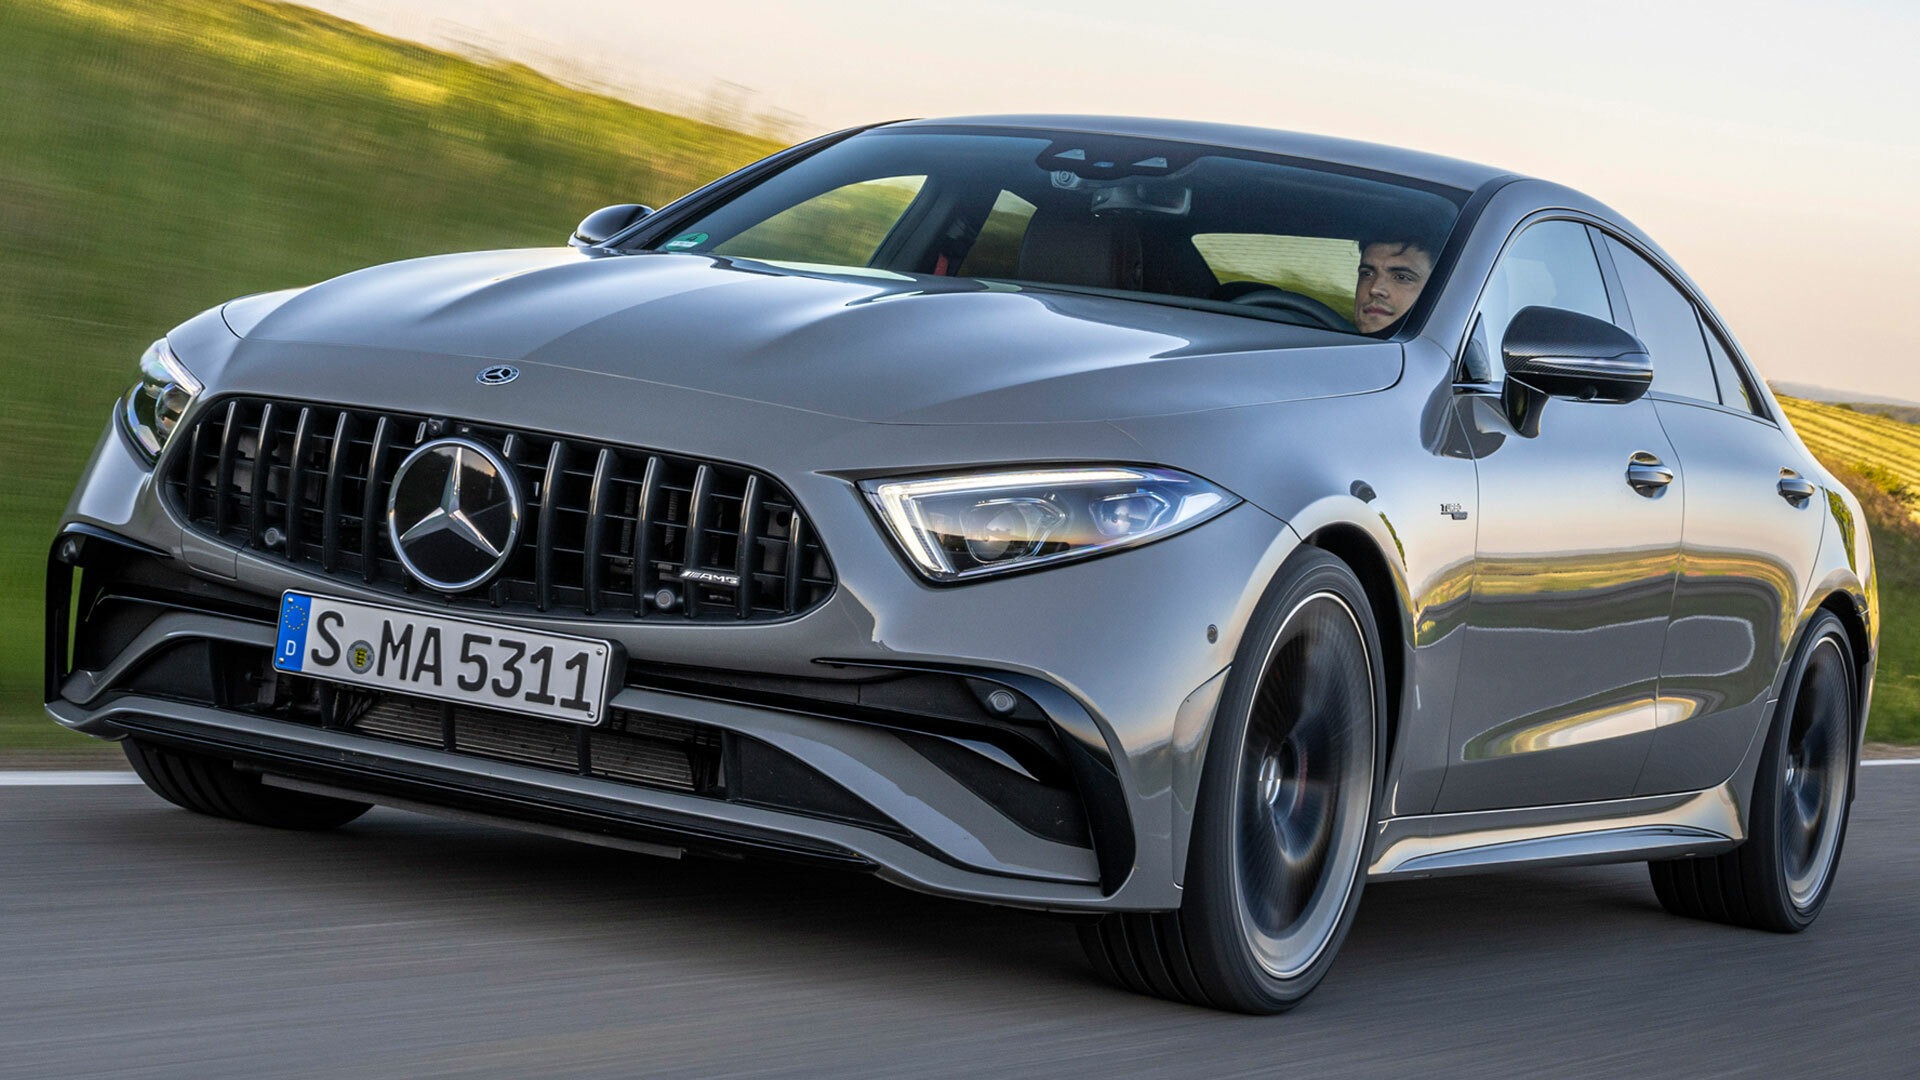 The best new Mercedes-Benz models coming by 2025: all you need to know